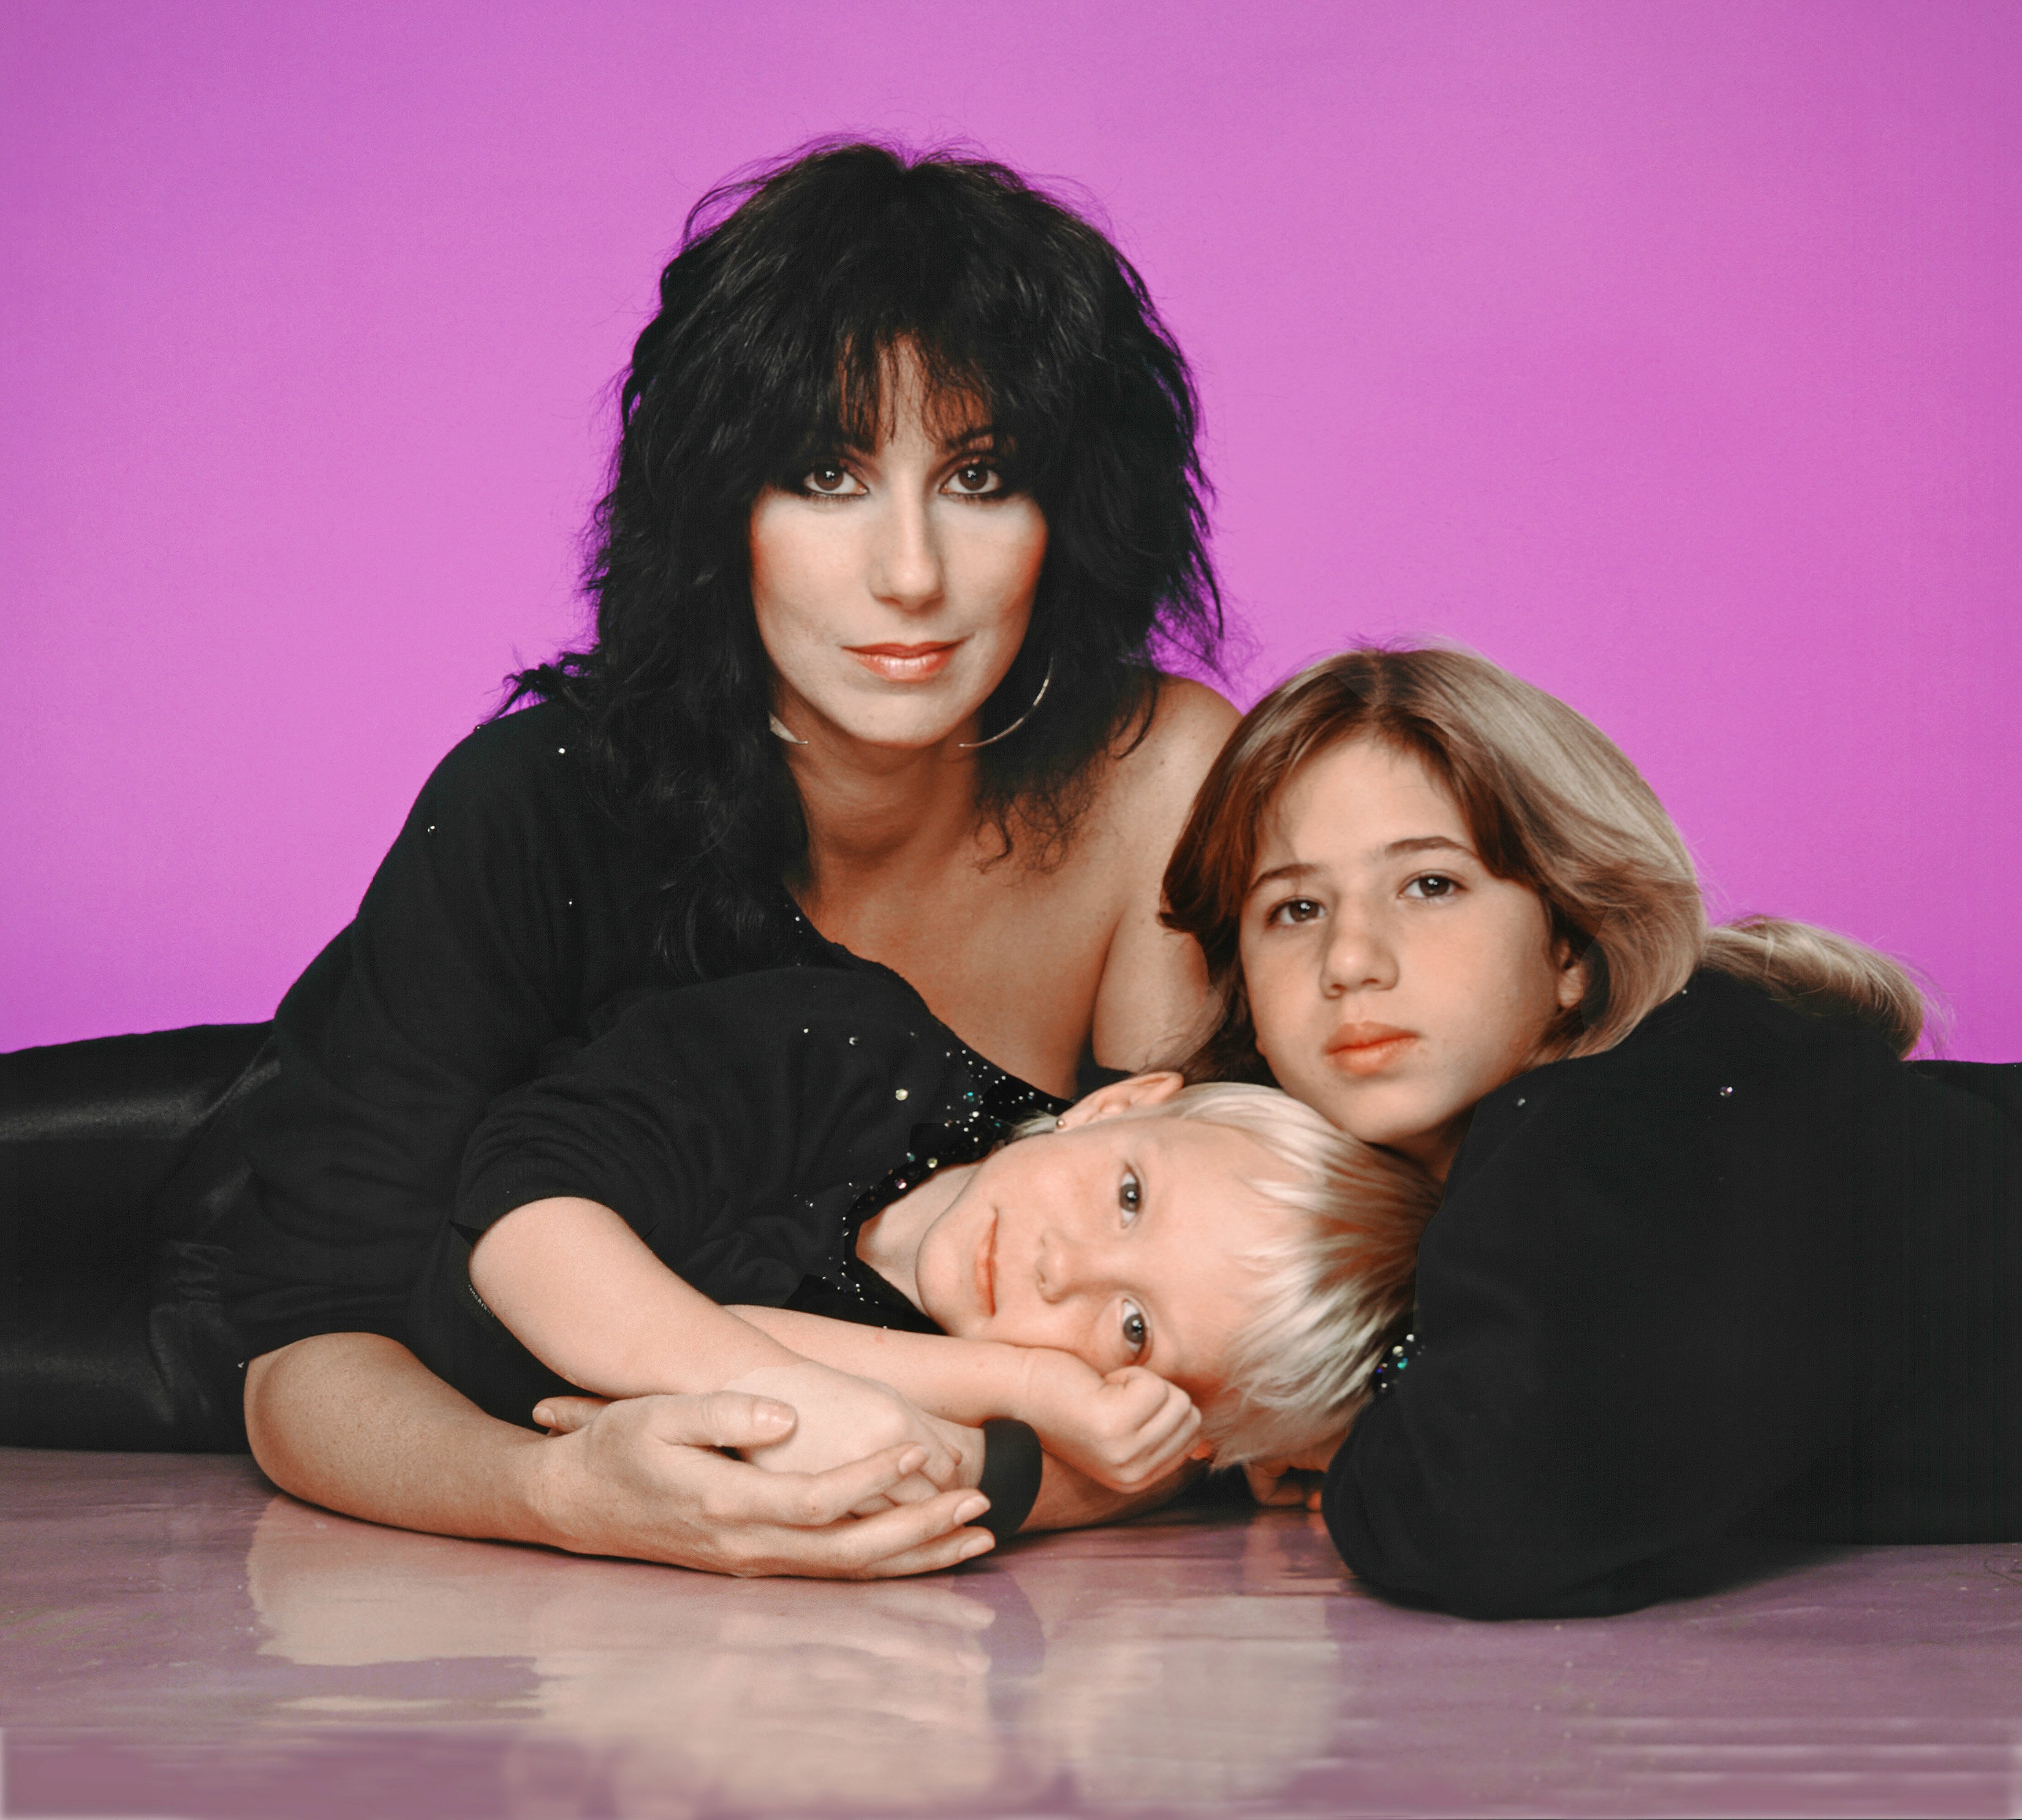 Cher pictured with her children Chastity Bono and Elijah Allman on January 1, 1980 in Los Angeles, California | Source: Getty images